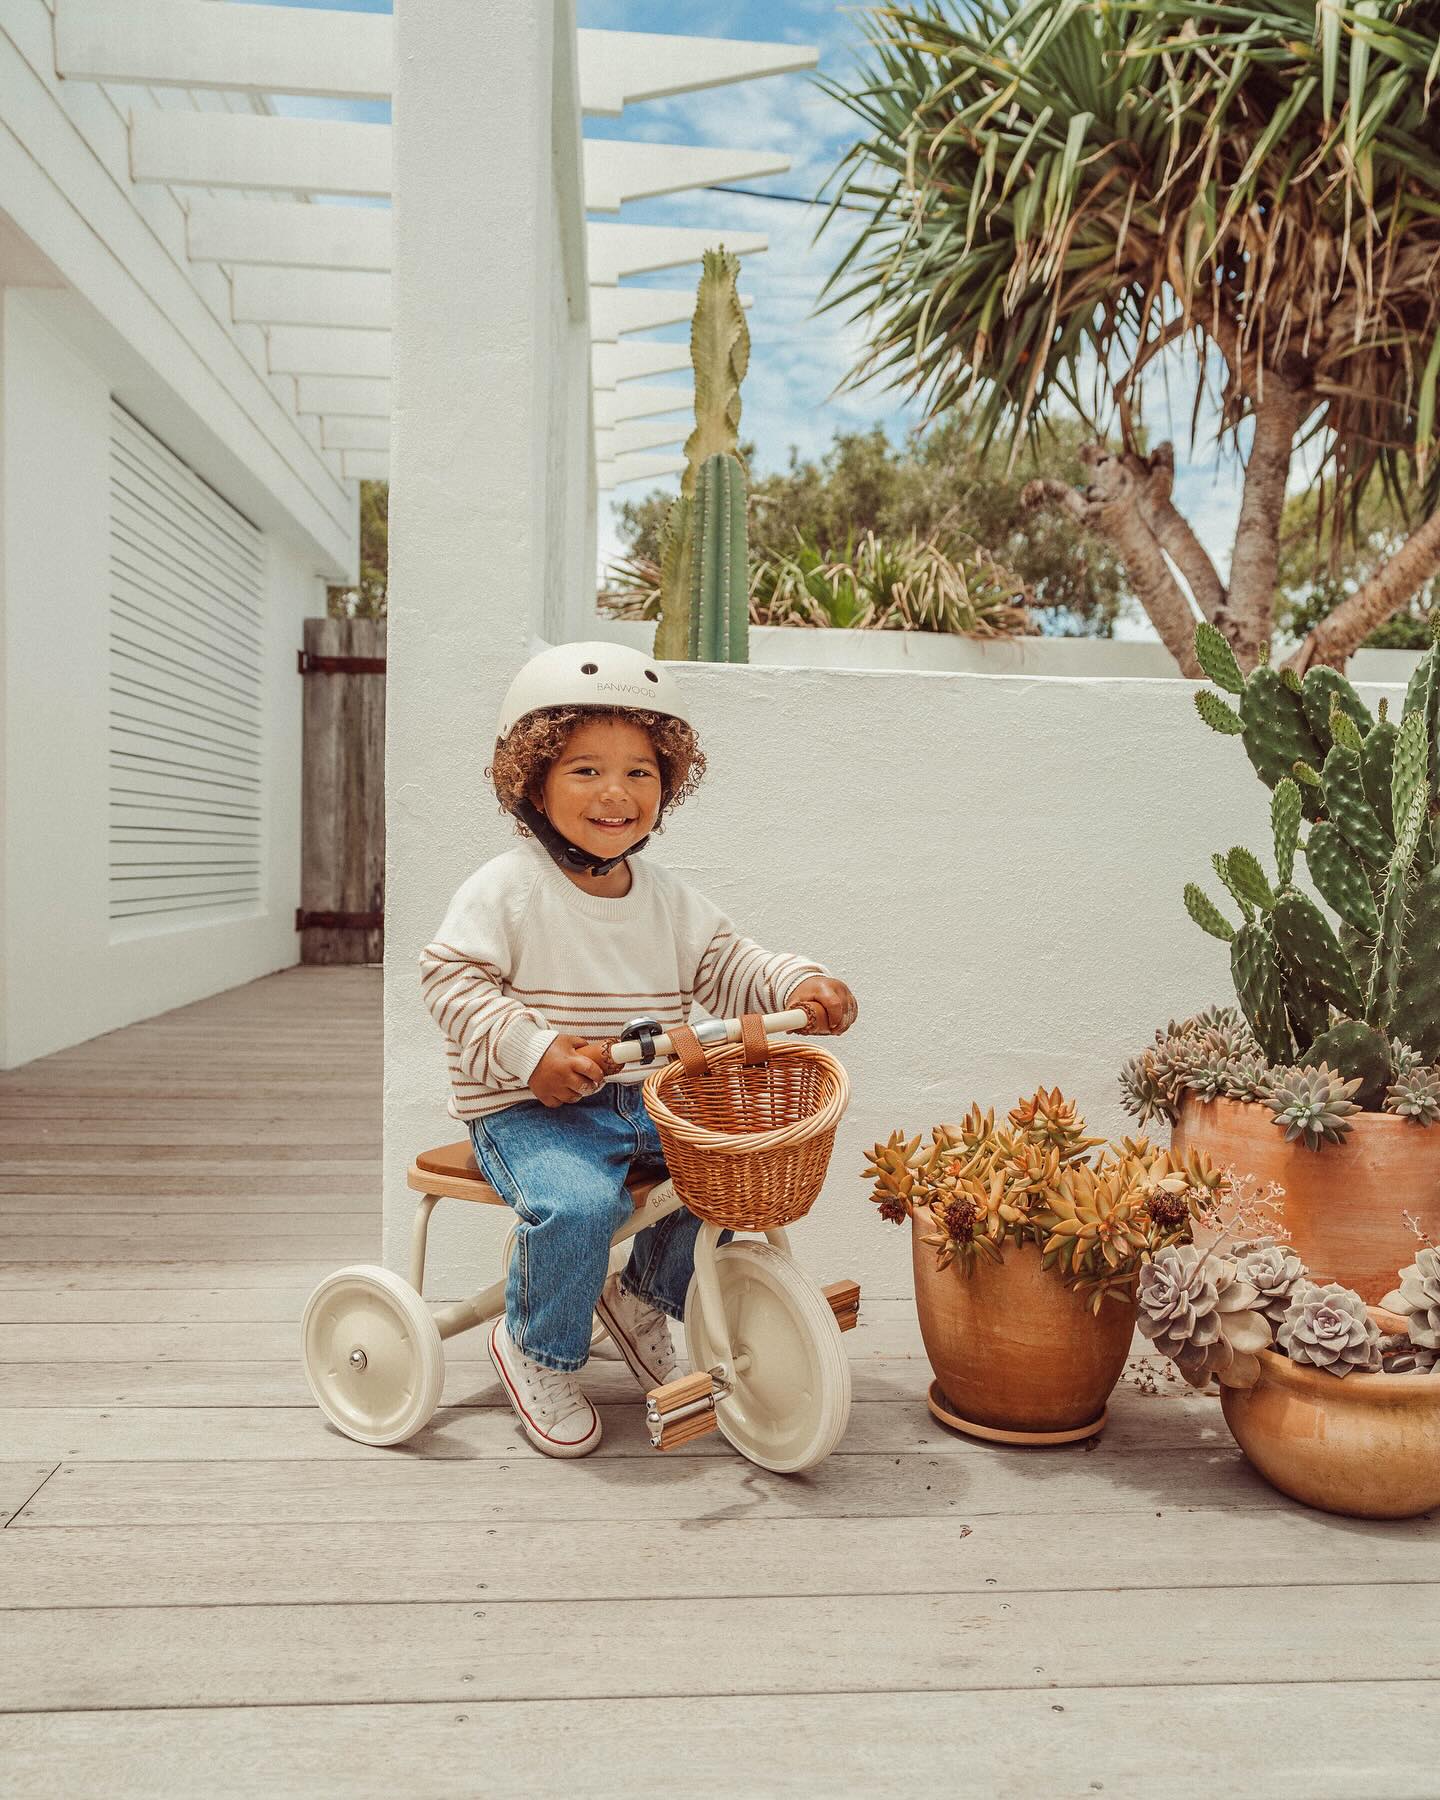 Adventures on three wheelsLeo is 3 years old and is riding our Trike in Cream. Discover the full Trike collection via link in bio